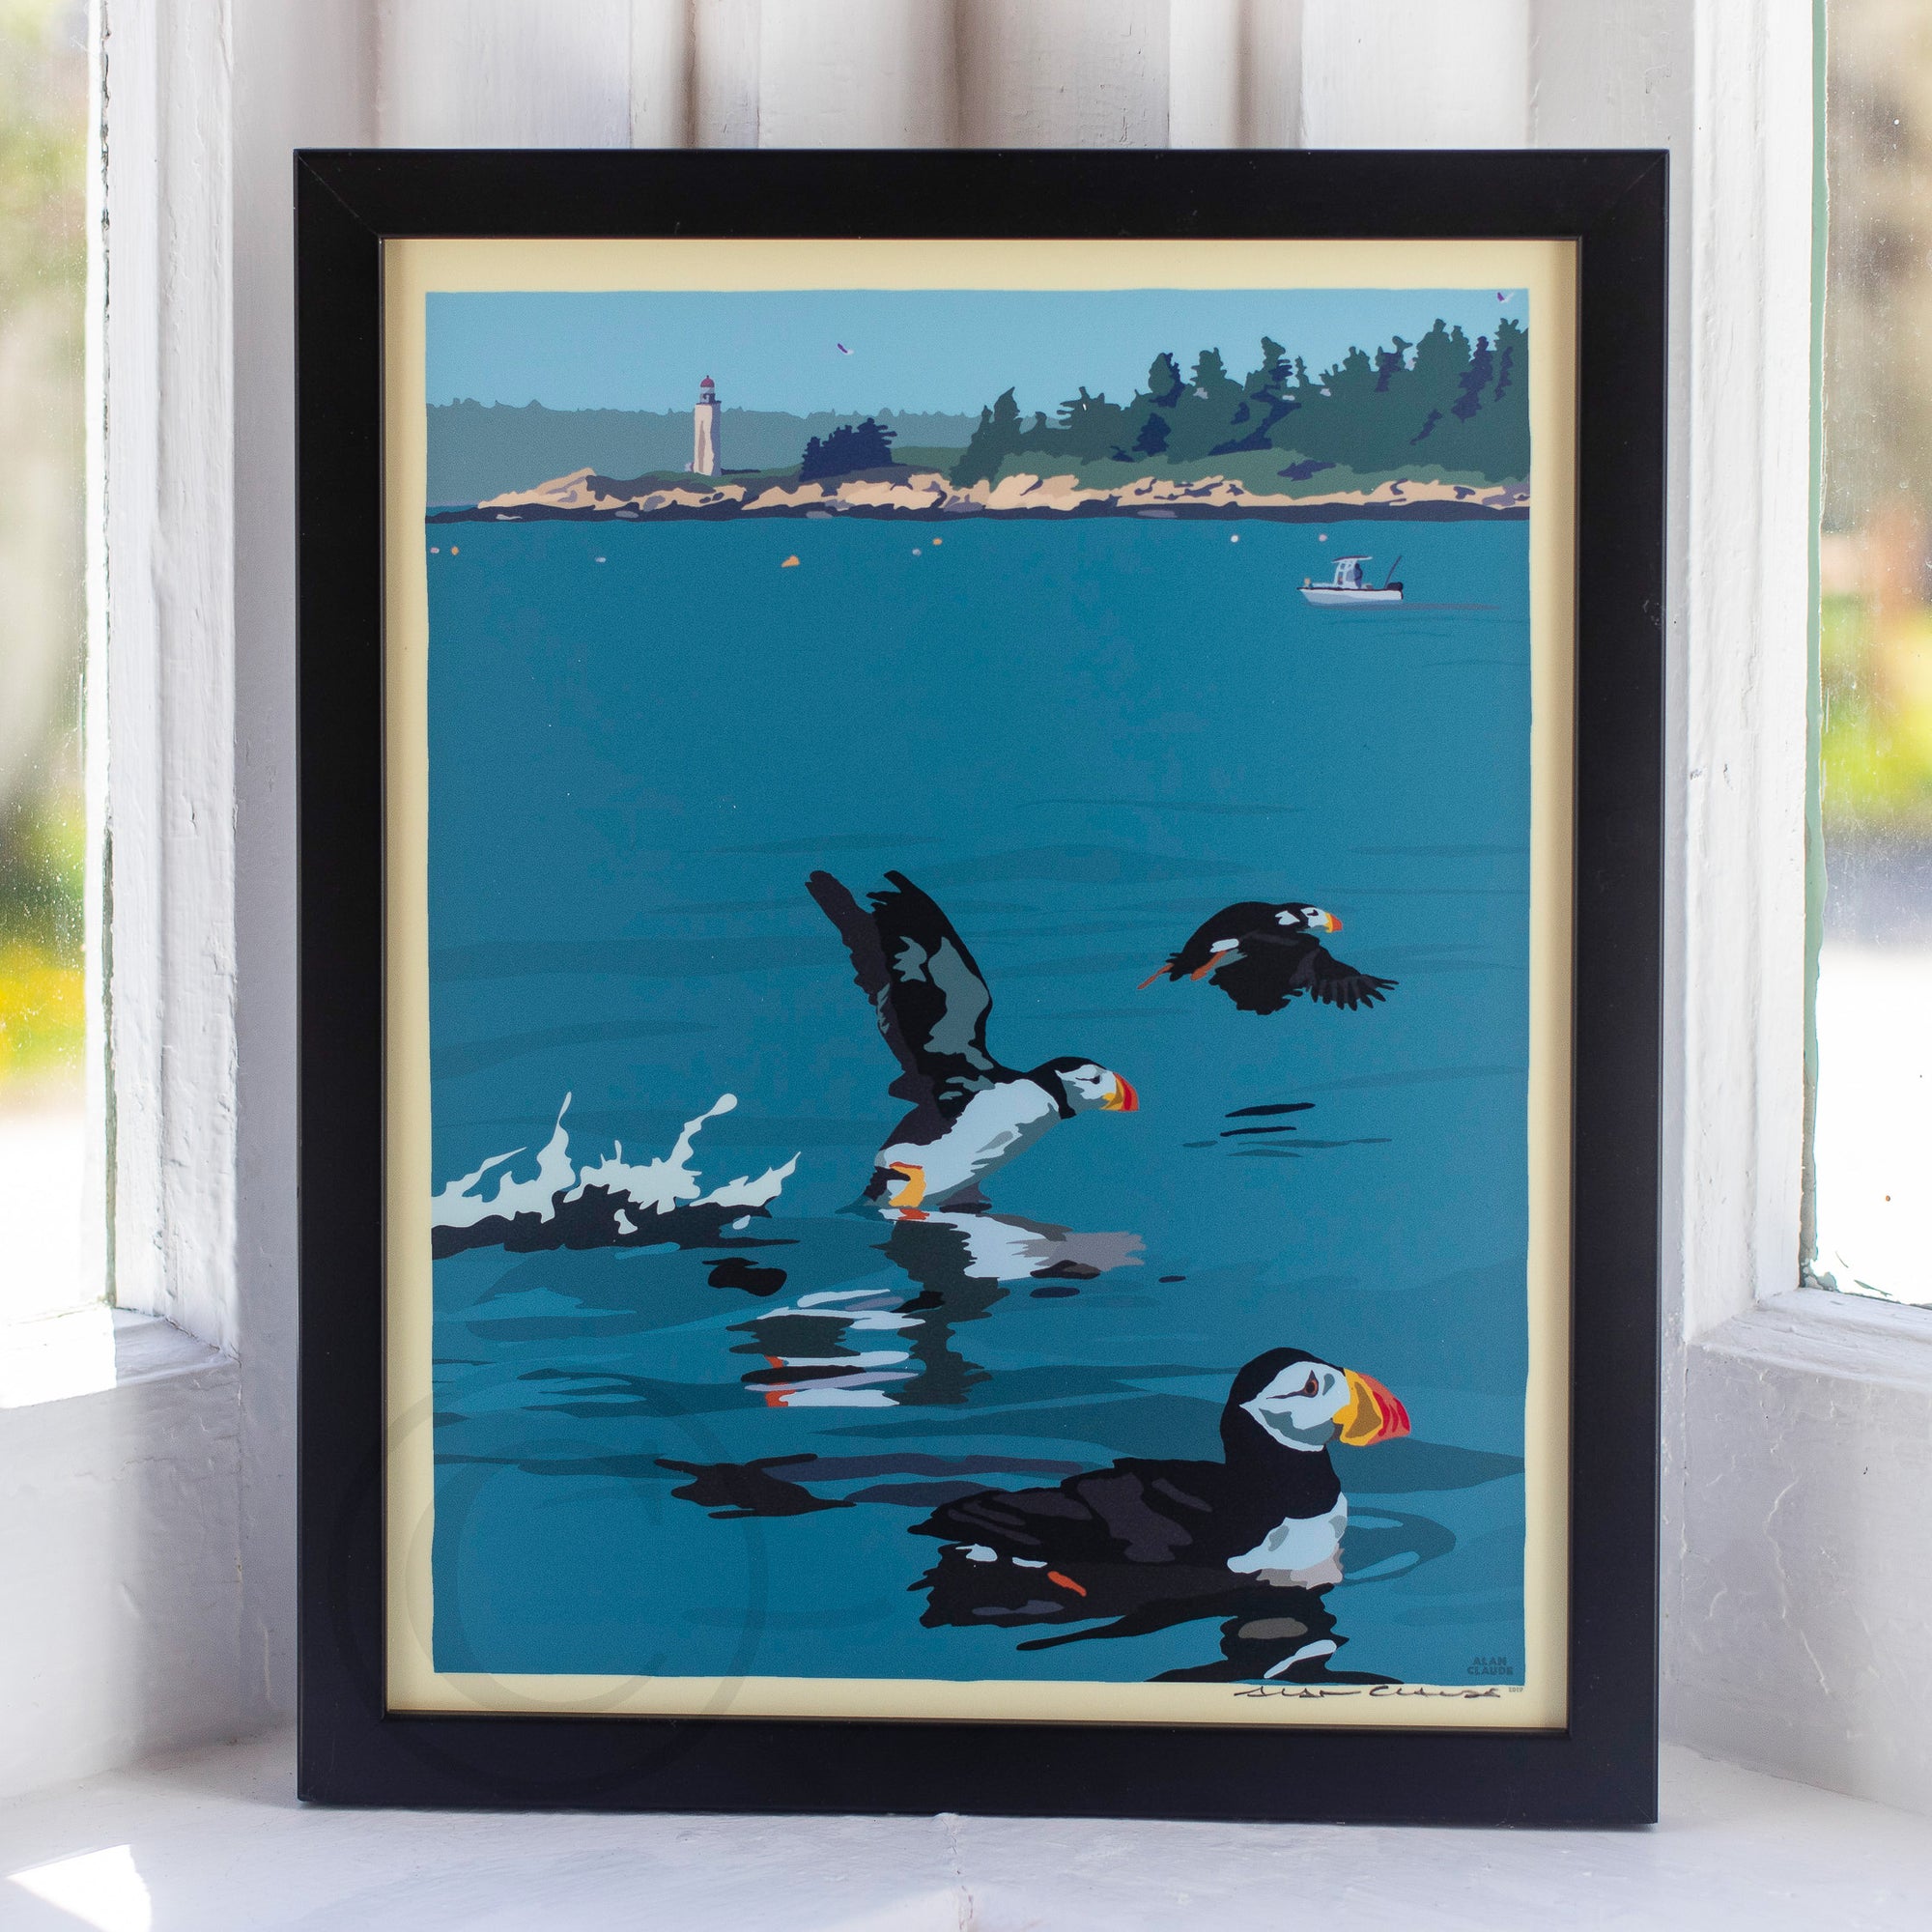 Puffins At Franklin Island Art Print 8" x 10" Framed Wall Poster By Alan Claude - Maine